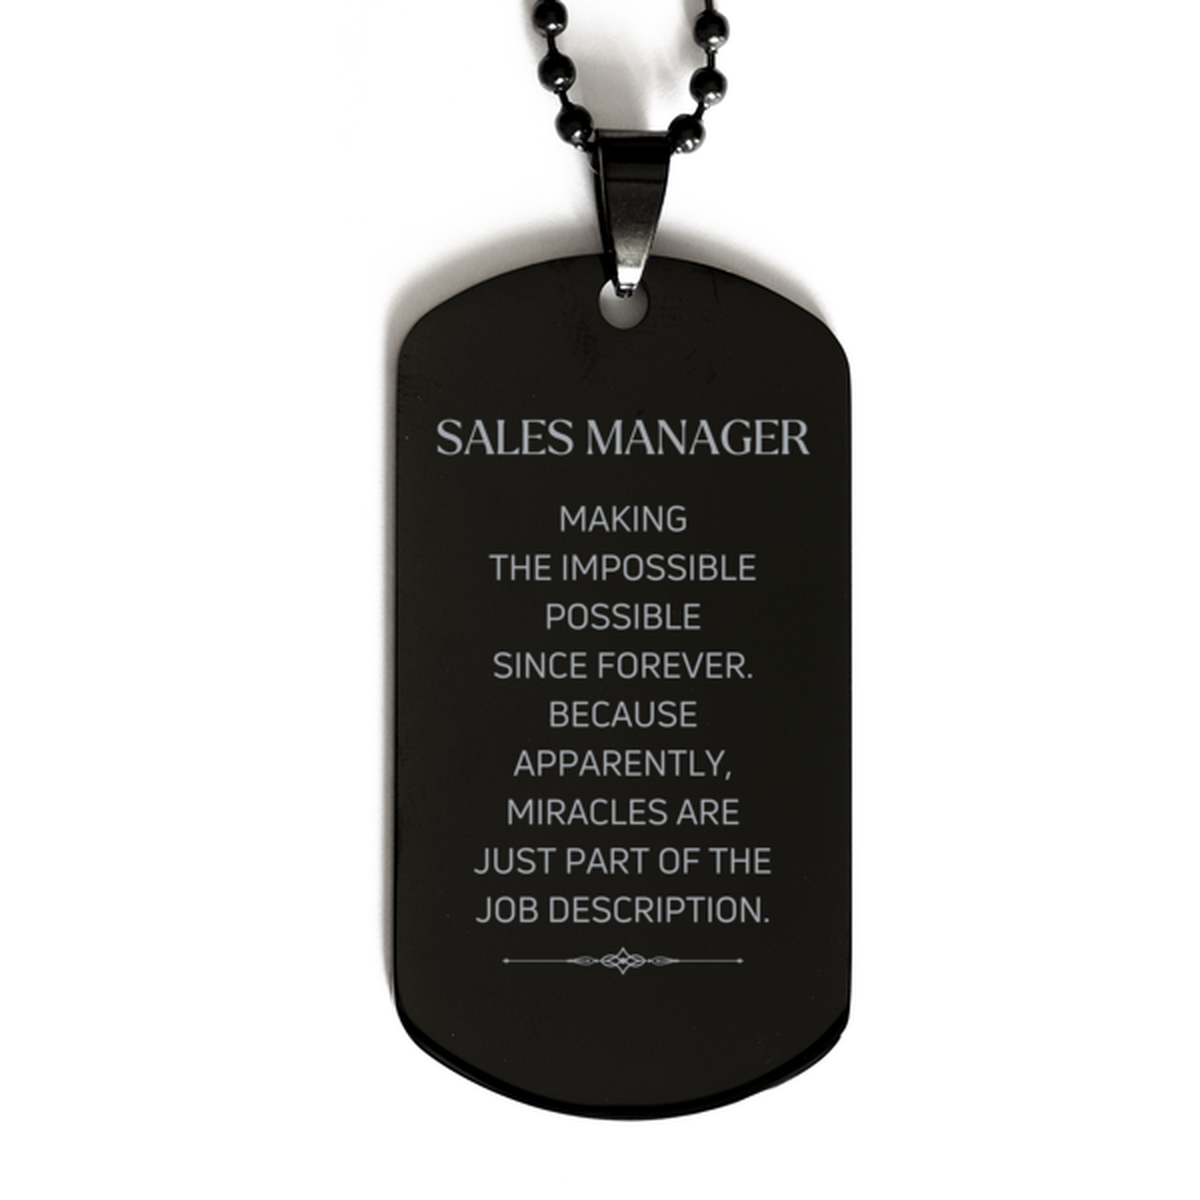 Funny Sales Manager Gifts, Miracles are just part of the job description, Inspirational Birthday Black Dog Tag For Sales Manager, Men, Women, Coworkers, Friends, Boss